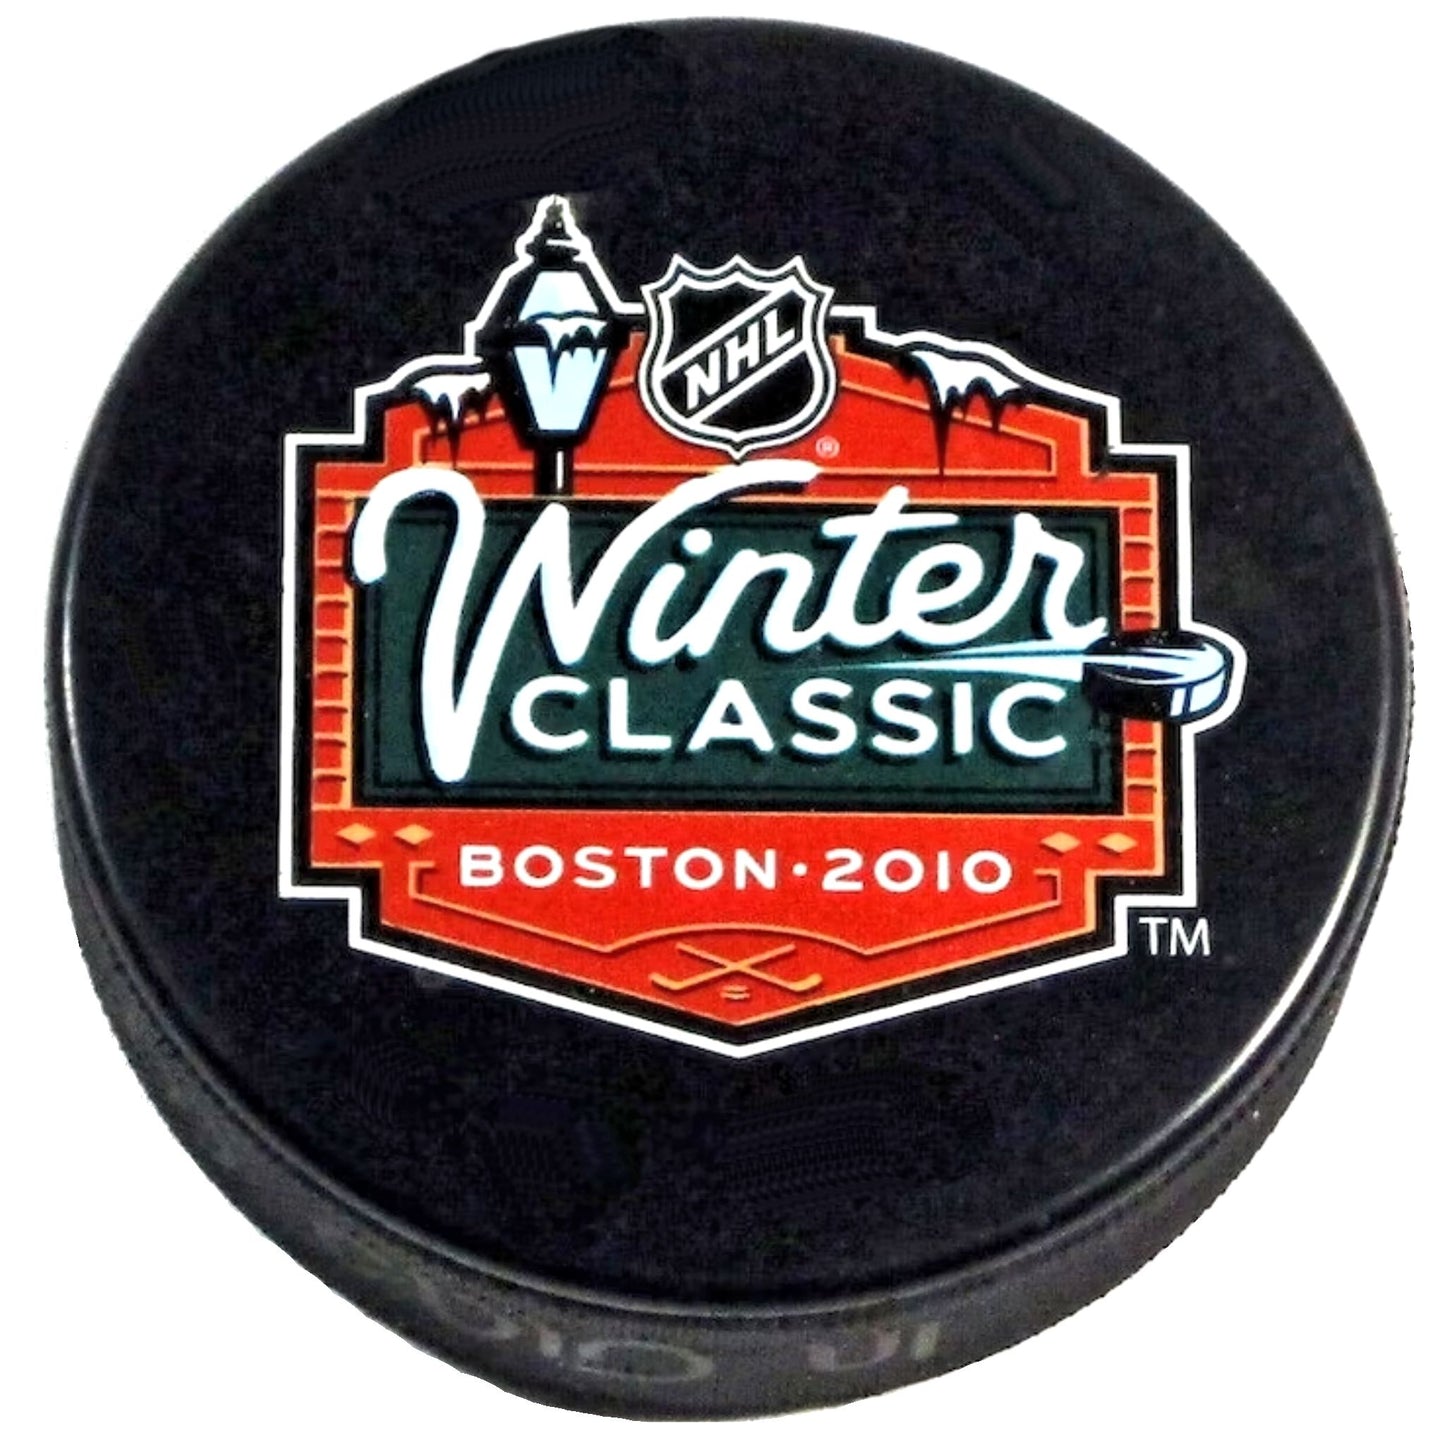 2010 NHL Winter Classic Collectible Hockey Puck Hat Trick Pack